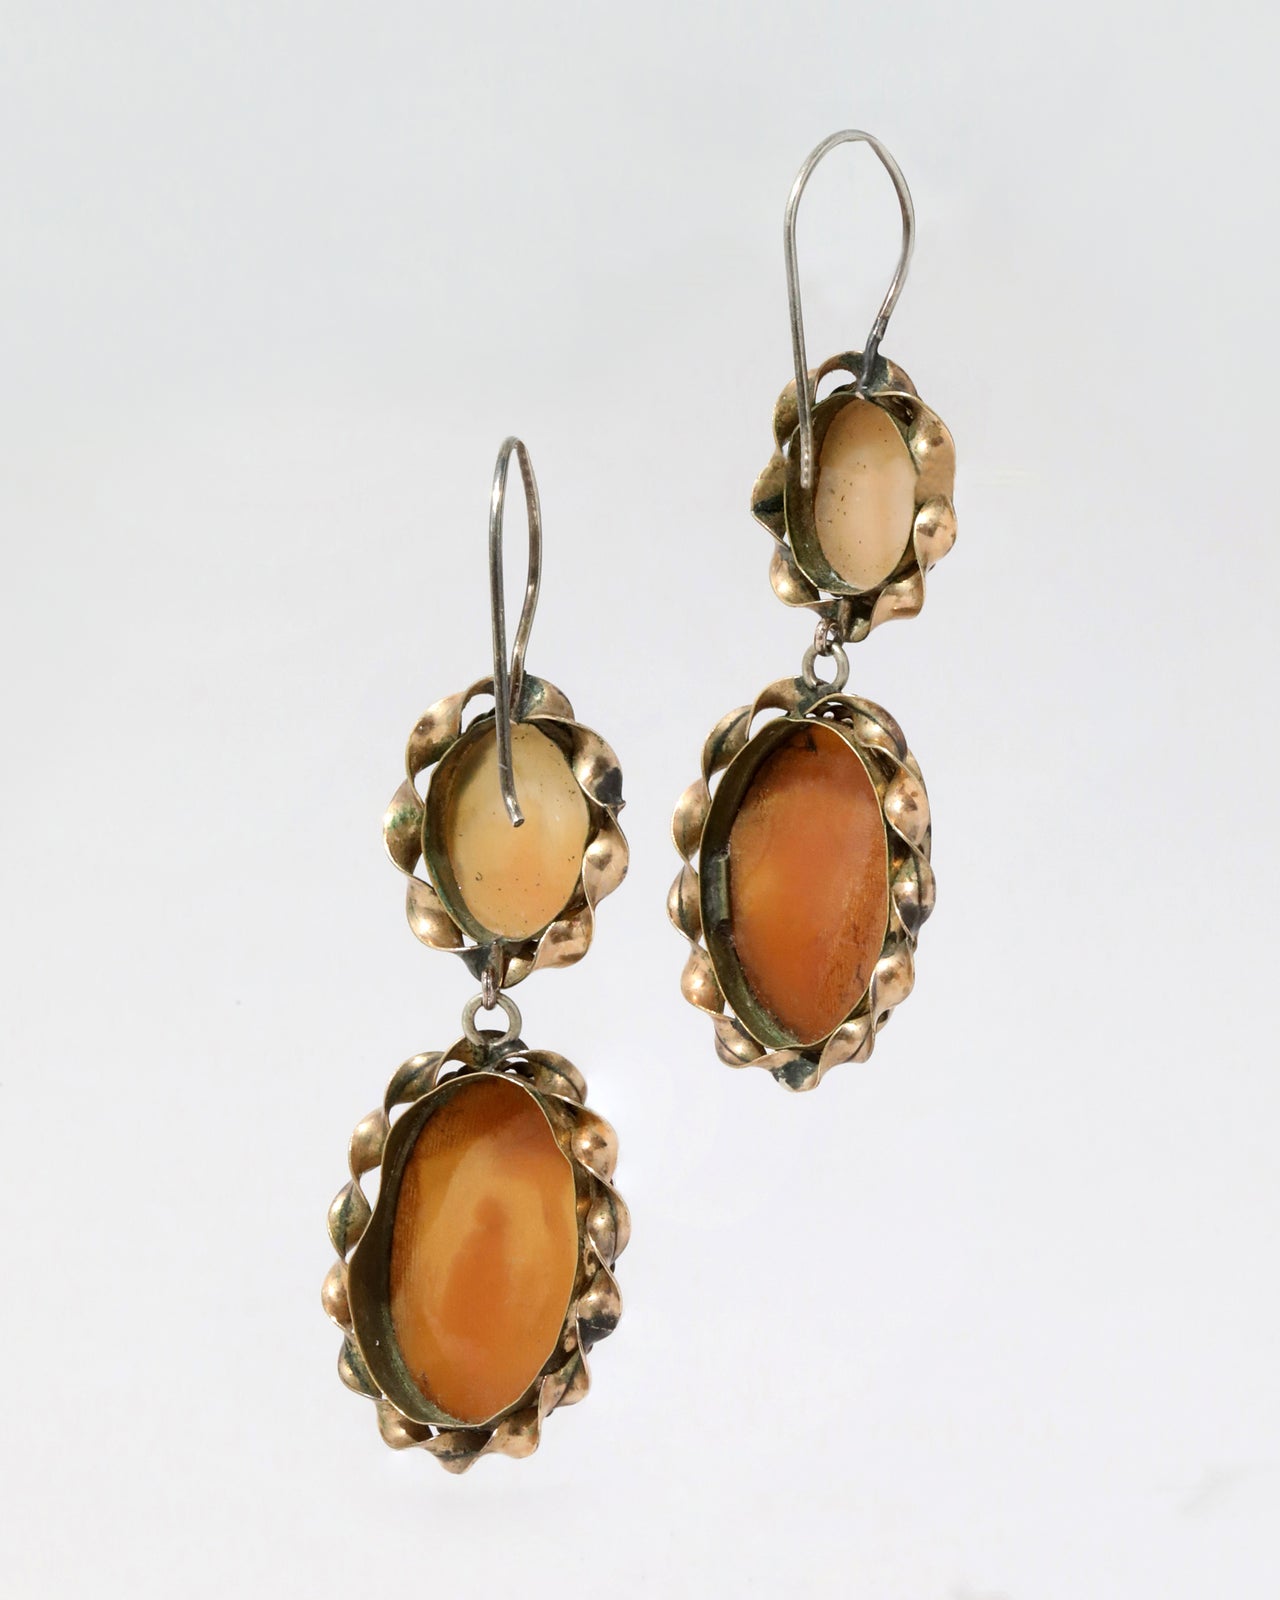 Antique Victorian 14k Gold Fill Hand-Carved Double Cameo Earrings - Photo 2